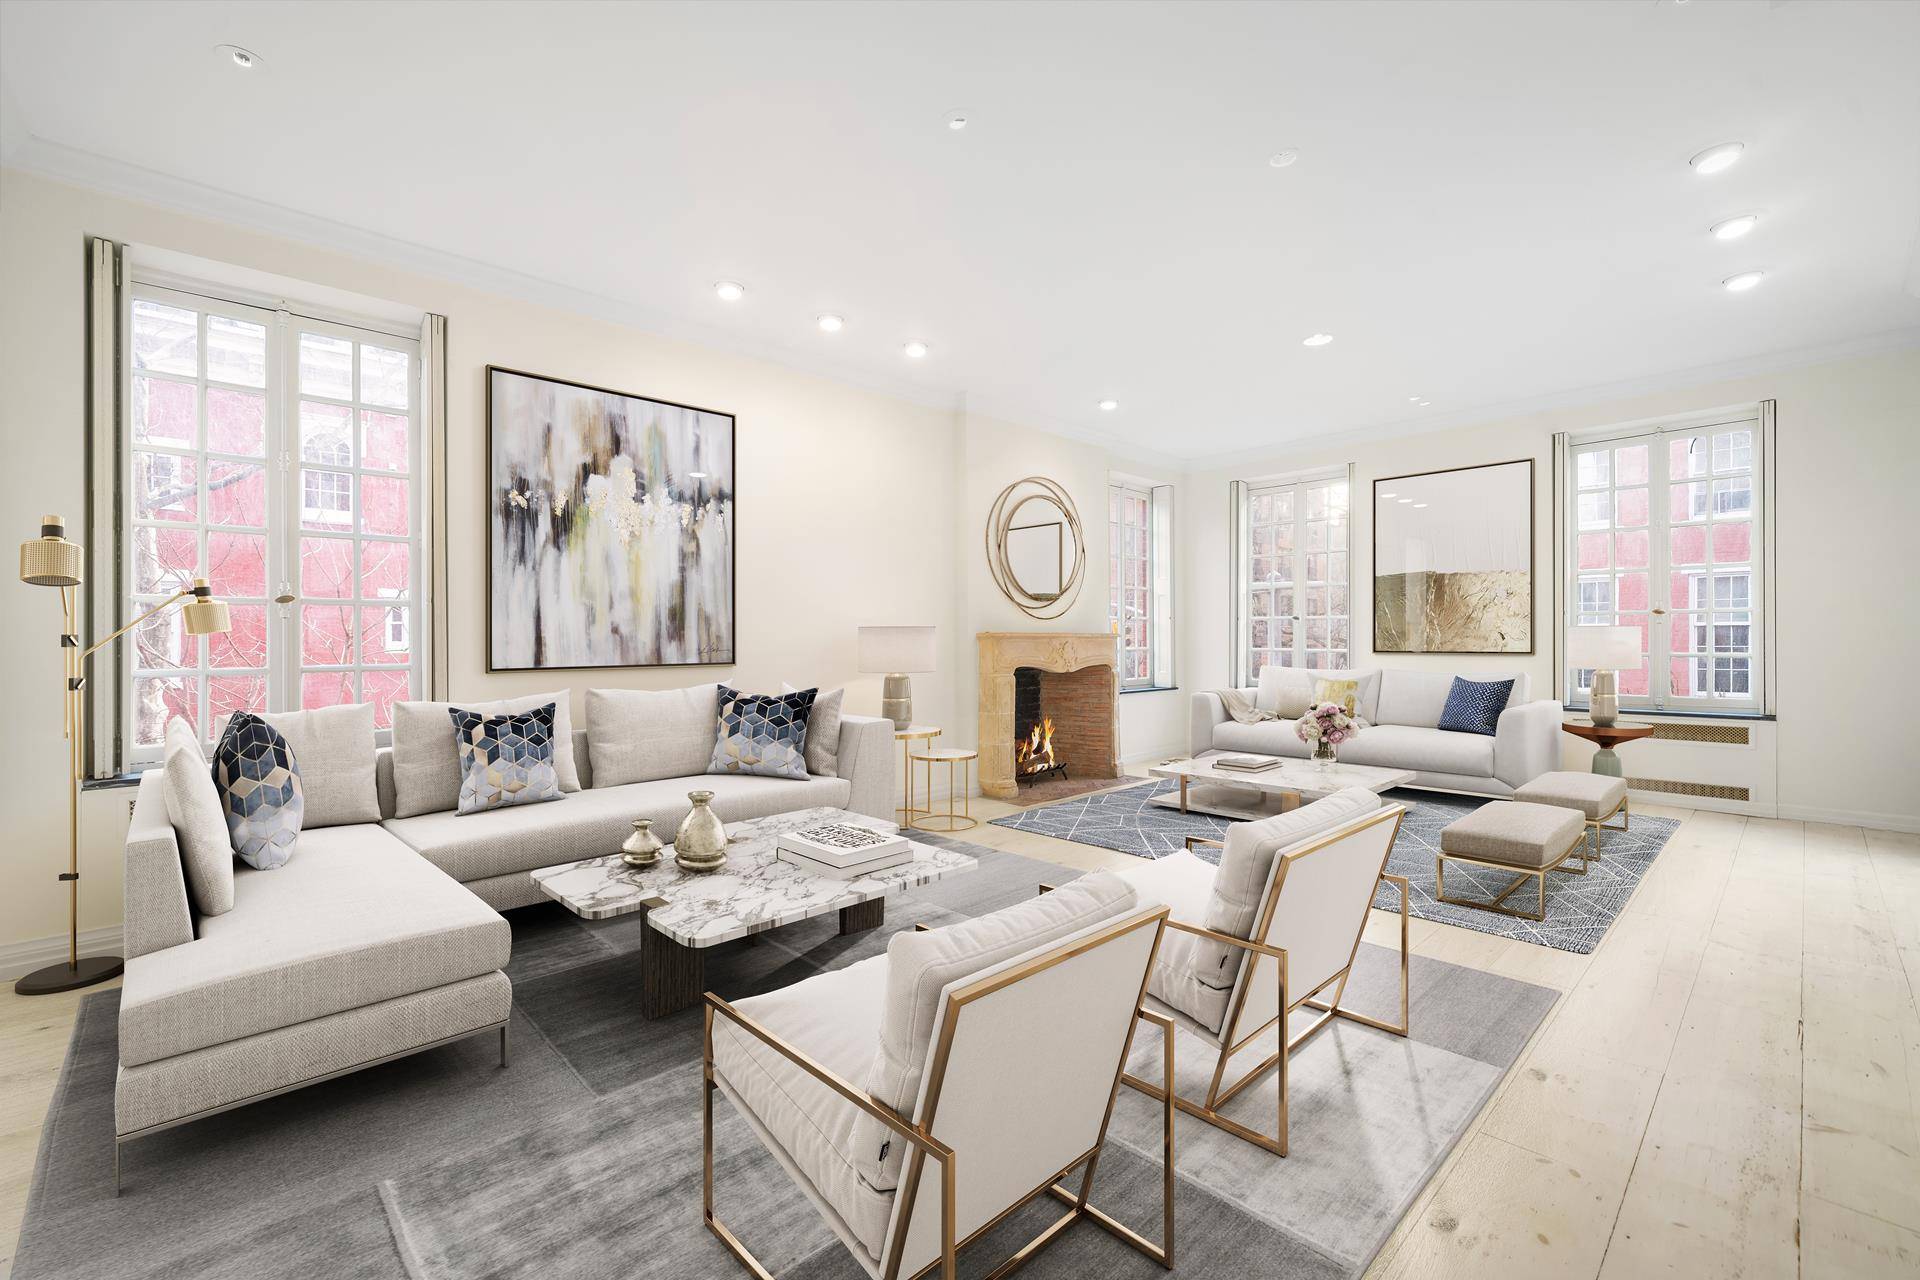 Paris in New YorkLocated in the heart of the West Village, this immaculate 2 bed, 2 bath full floor pre war condo has been updated throughout and available immediately.